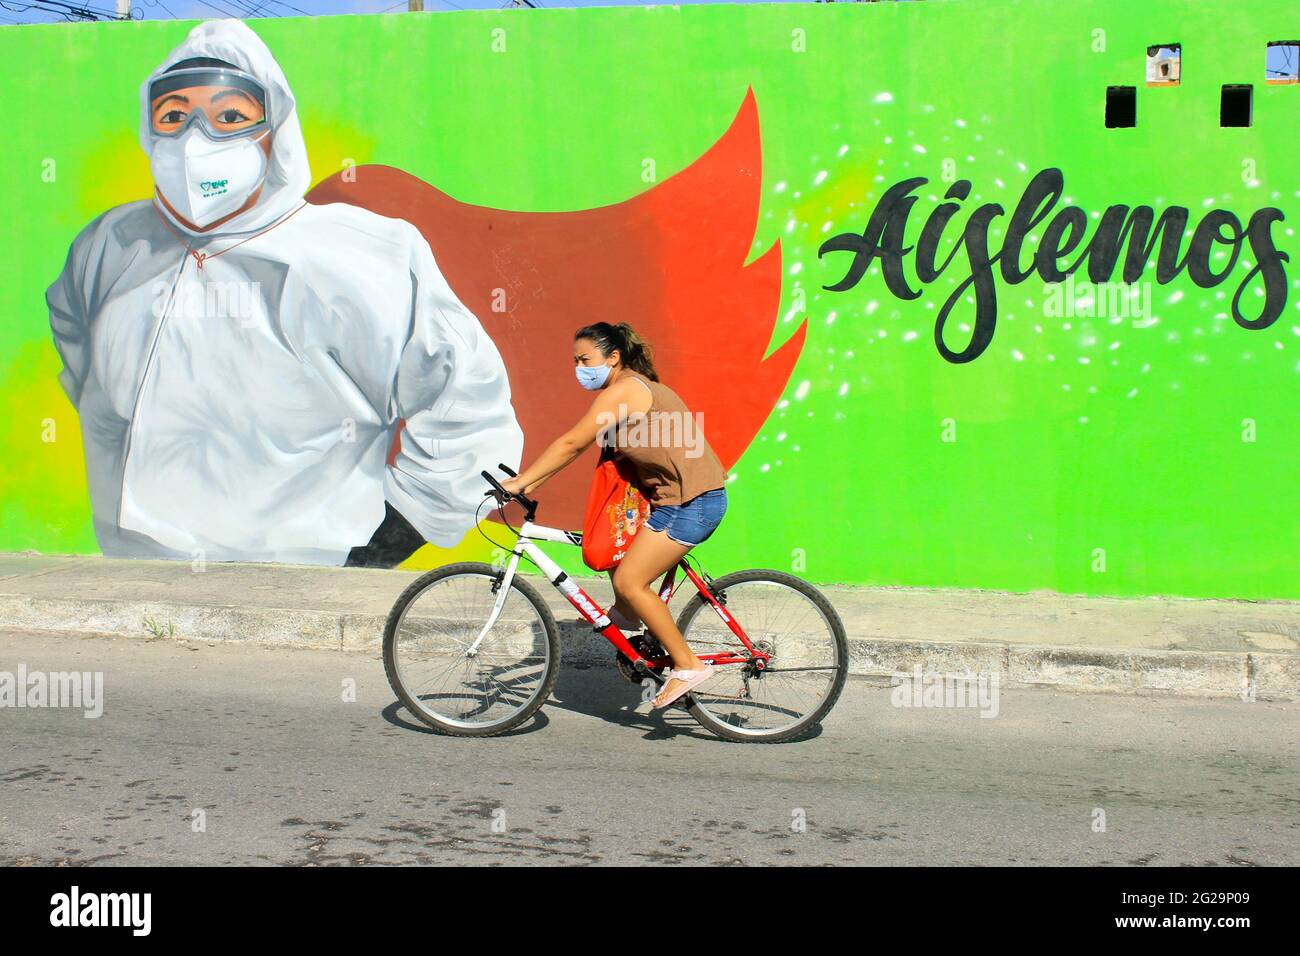 Mexican cyclist wearing a face mask passes in front of mural celebrating healthcare workers as Covid-19 Heroes, Merida Mexico Stock Photo